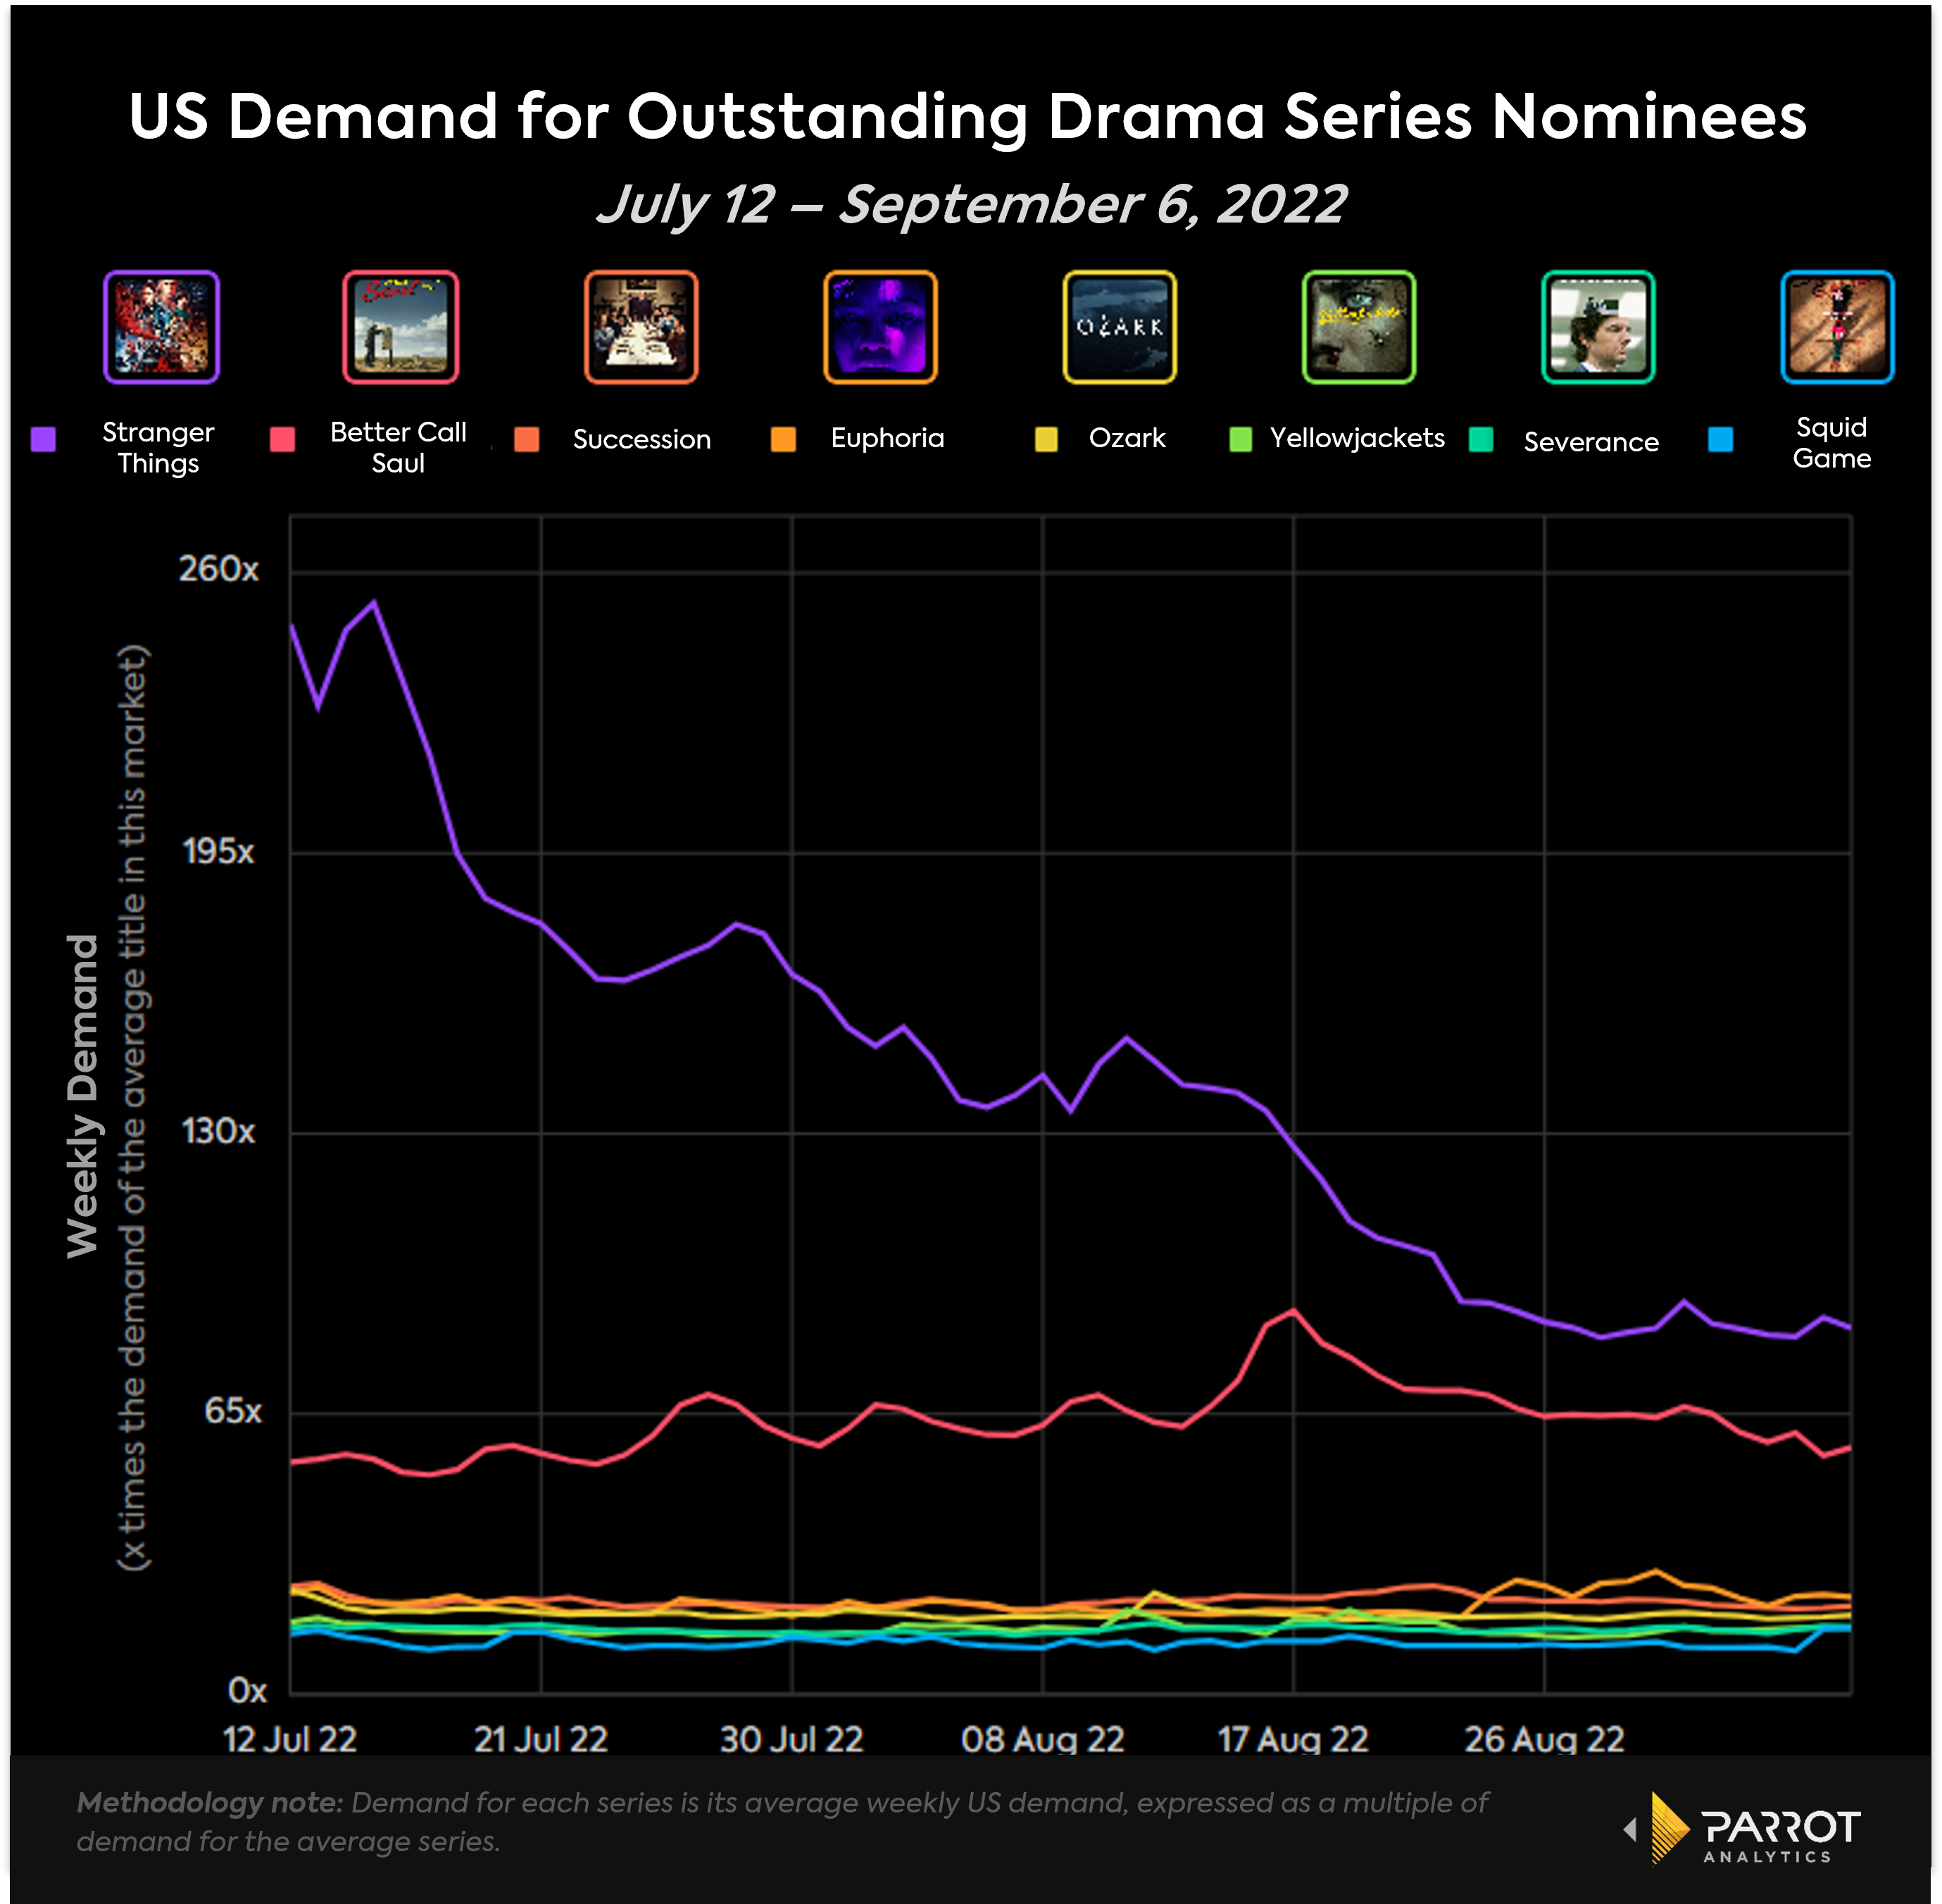 best_drama_since_noms_chart.png